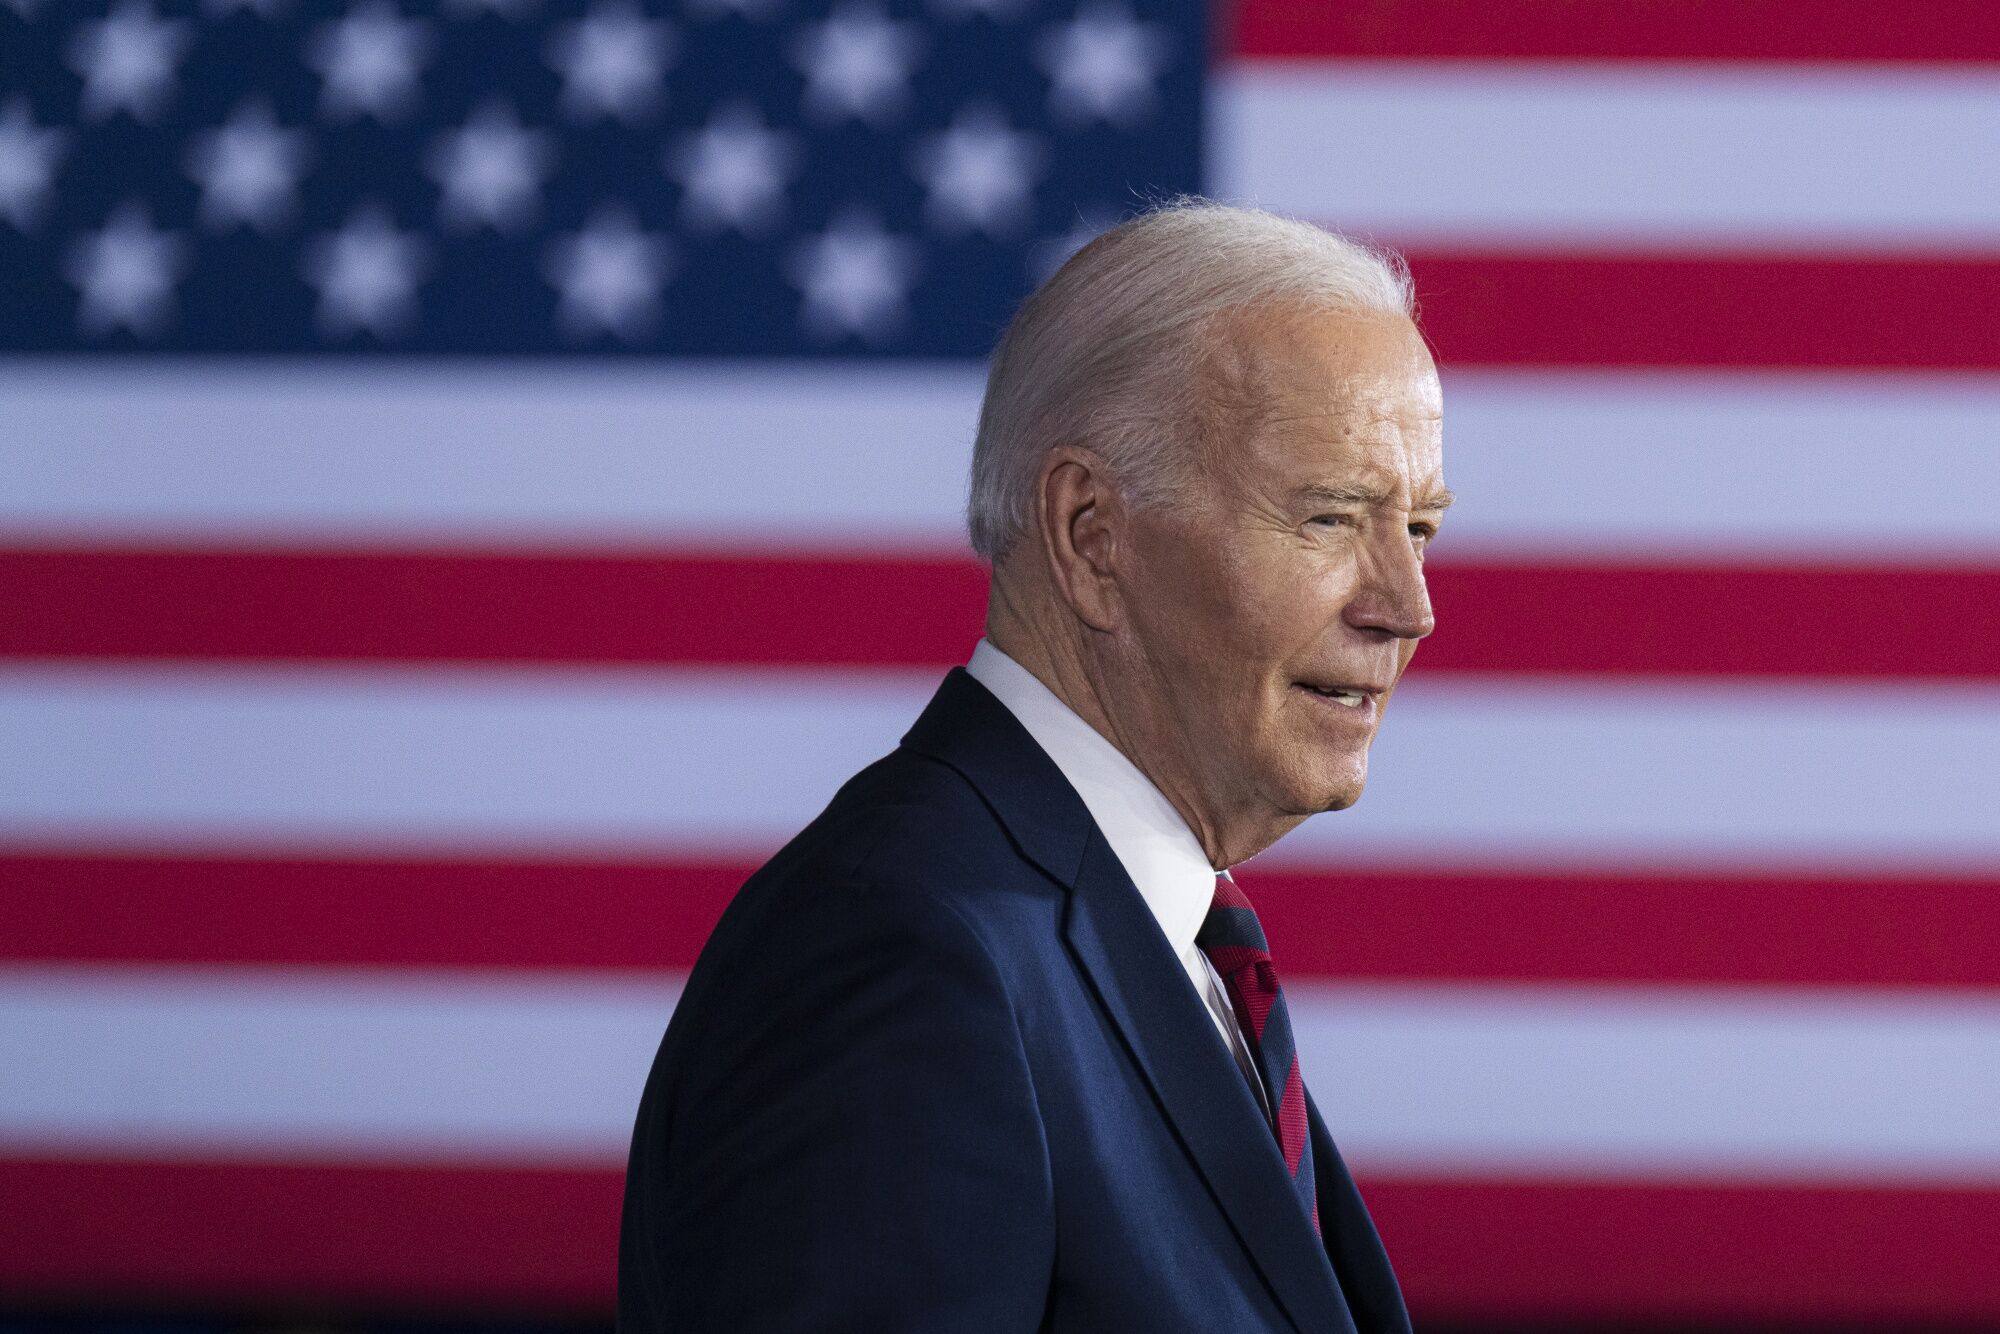 US President Joe Biden said that the national emergency executive order, subject to annual renewal, “must continue in effect” for the coming year. Photo: Bloomberg